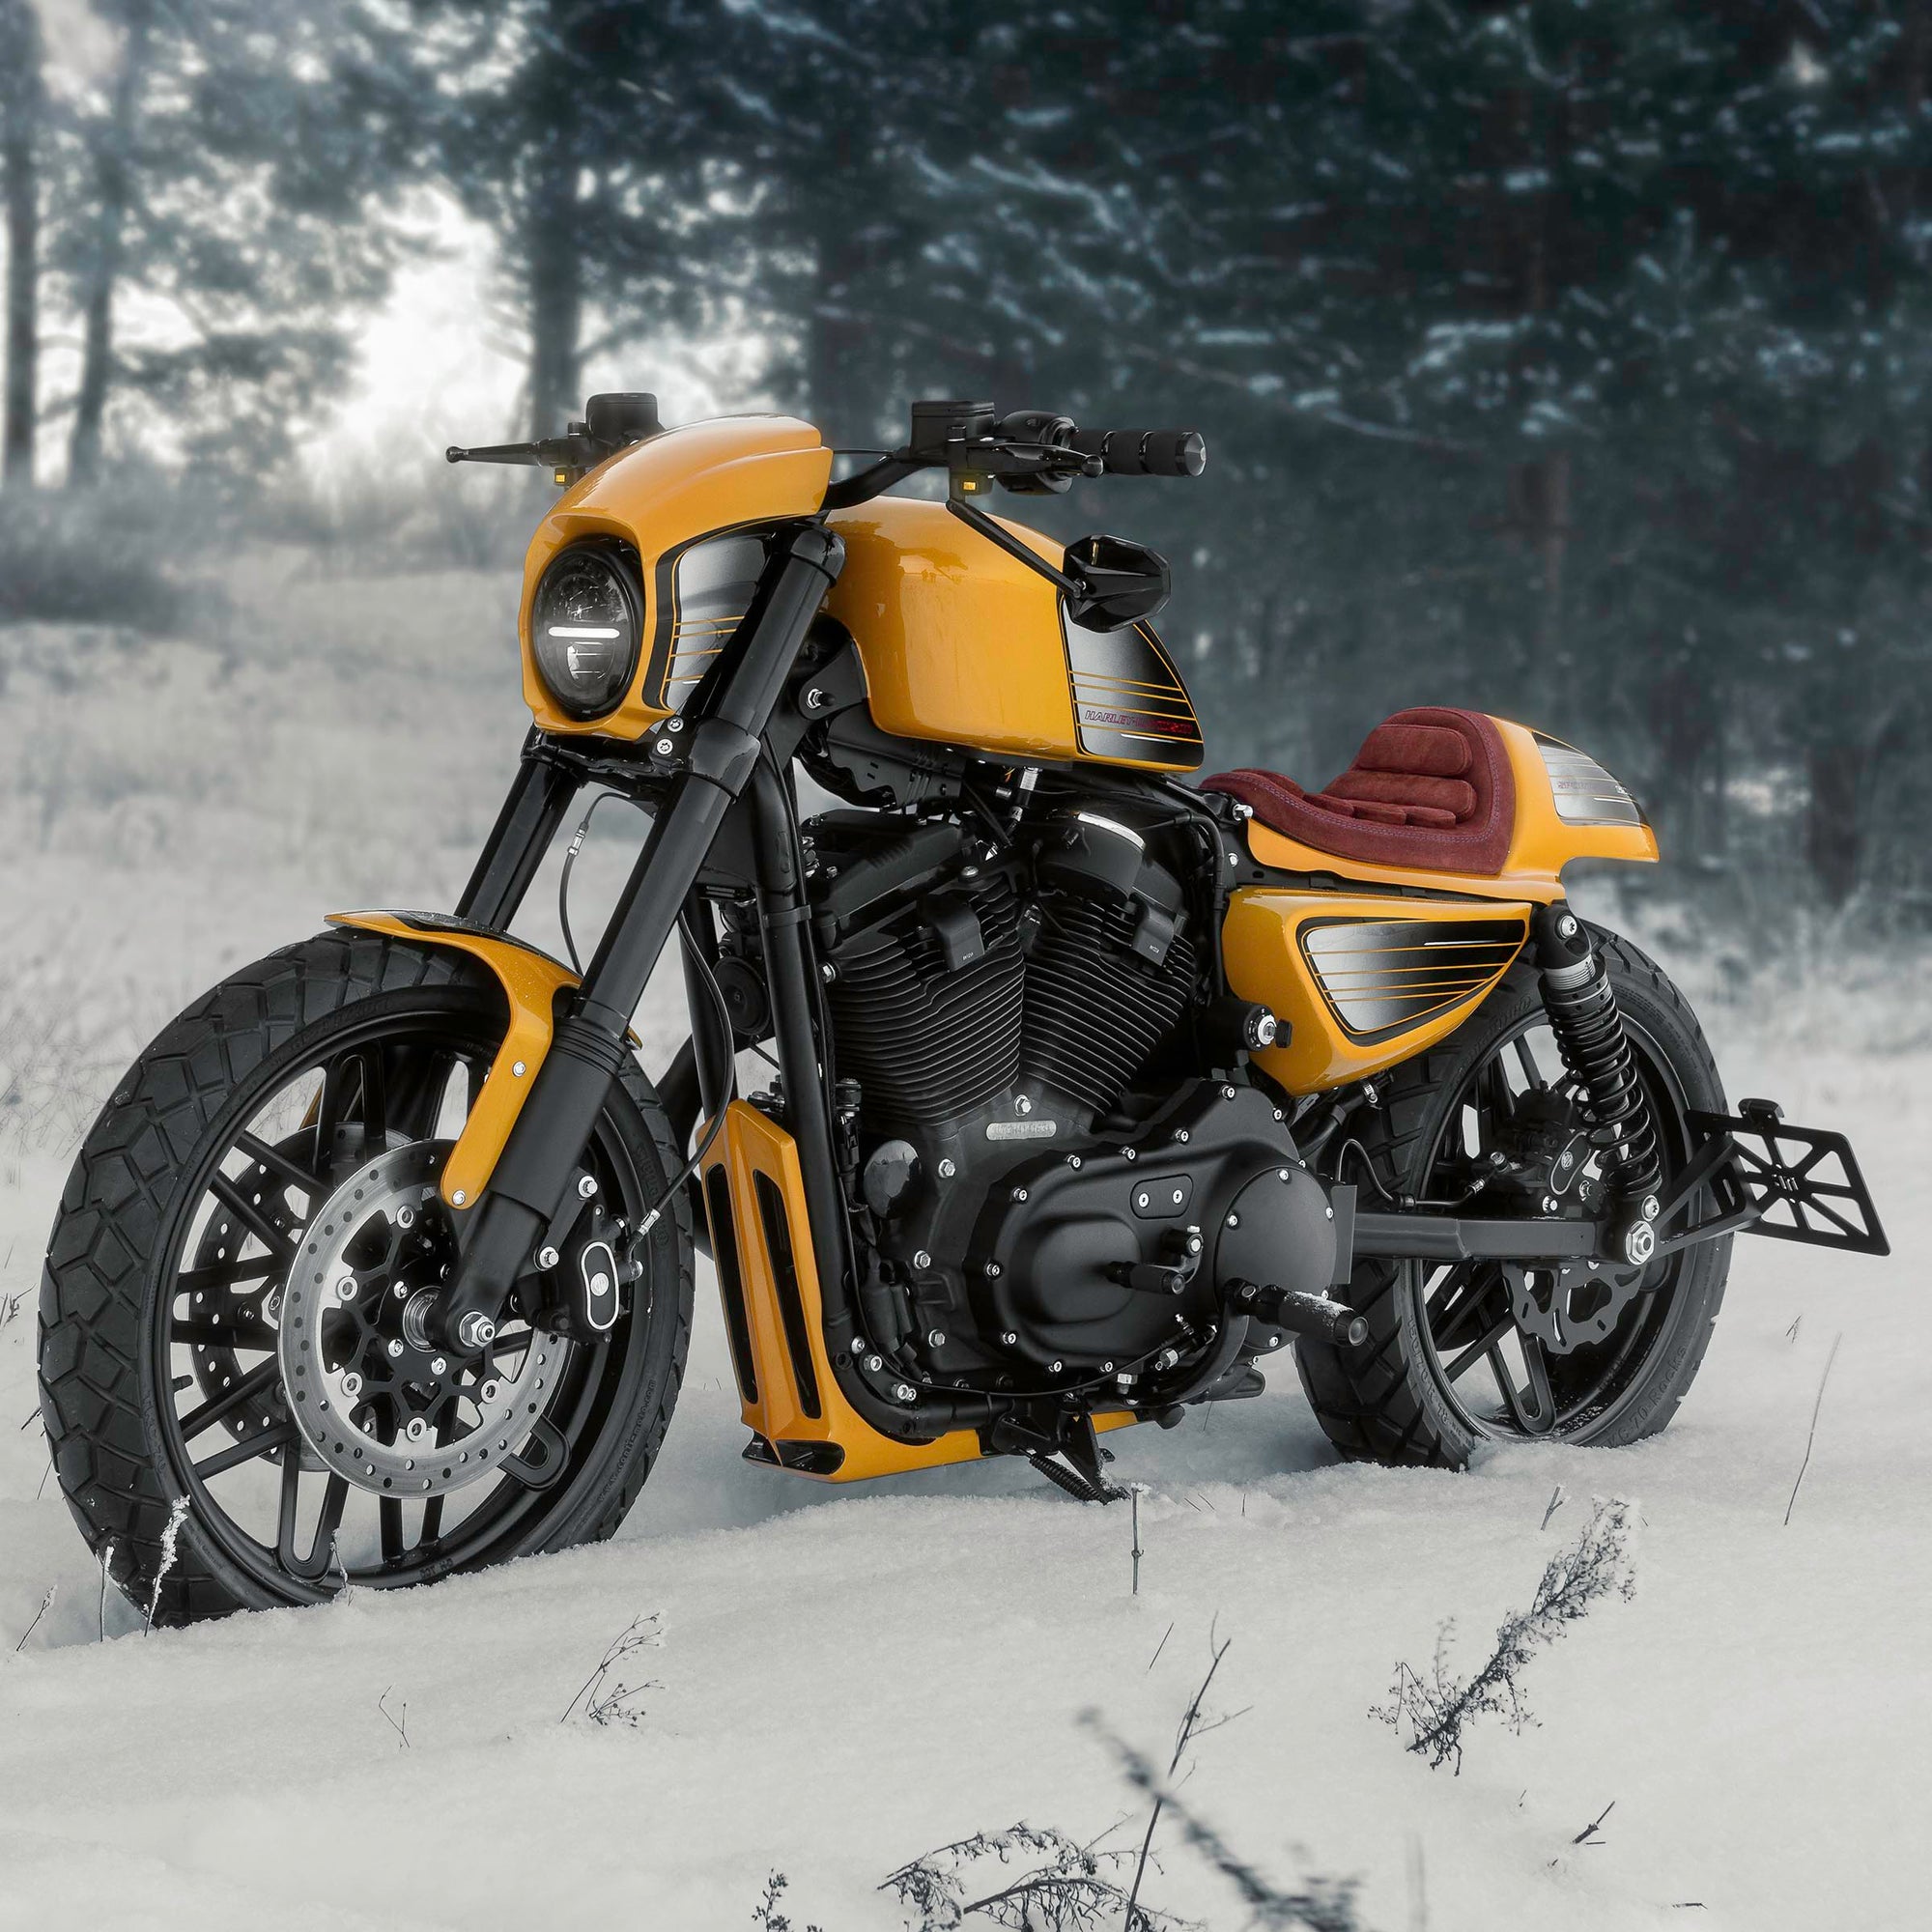 Harley Davidson motorcycle with Killer Custom parts from the side in winter with some snowy trees in the background